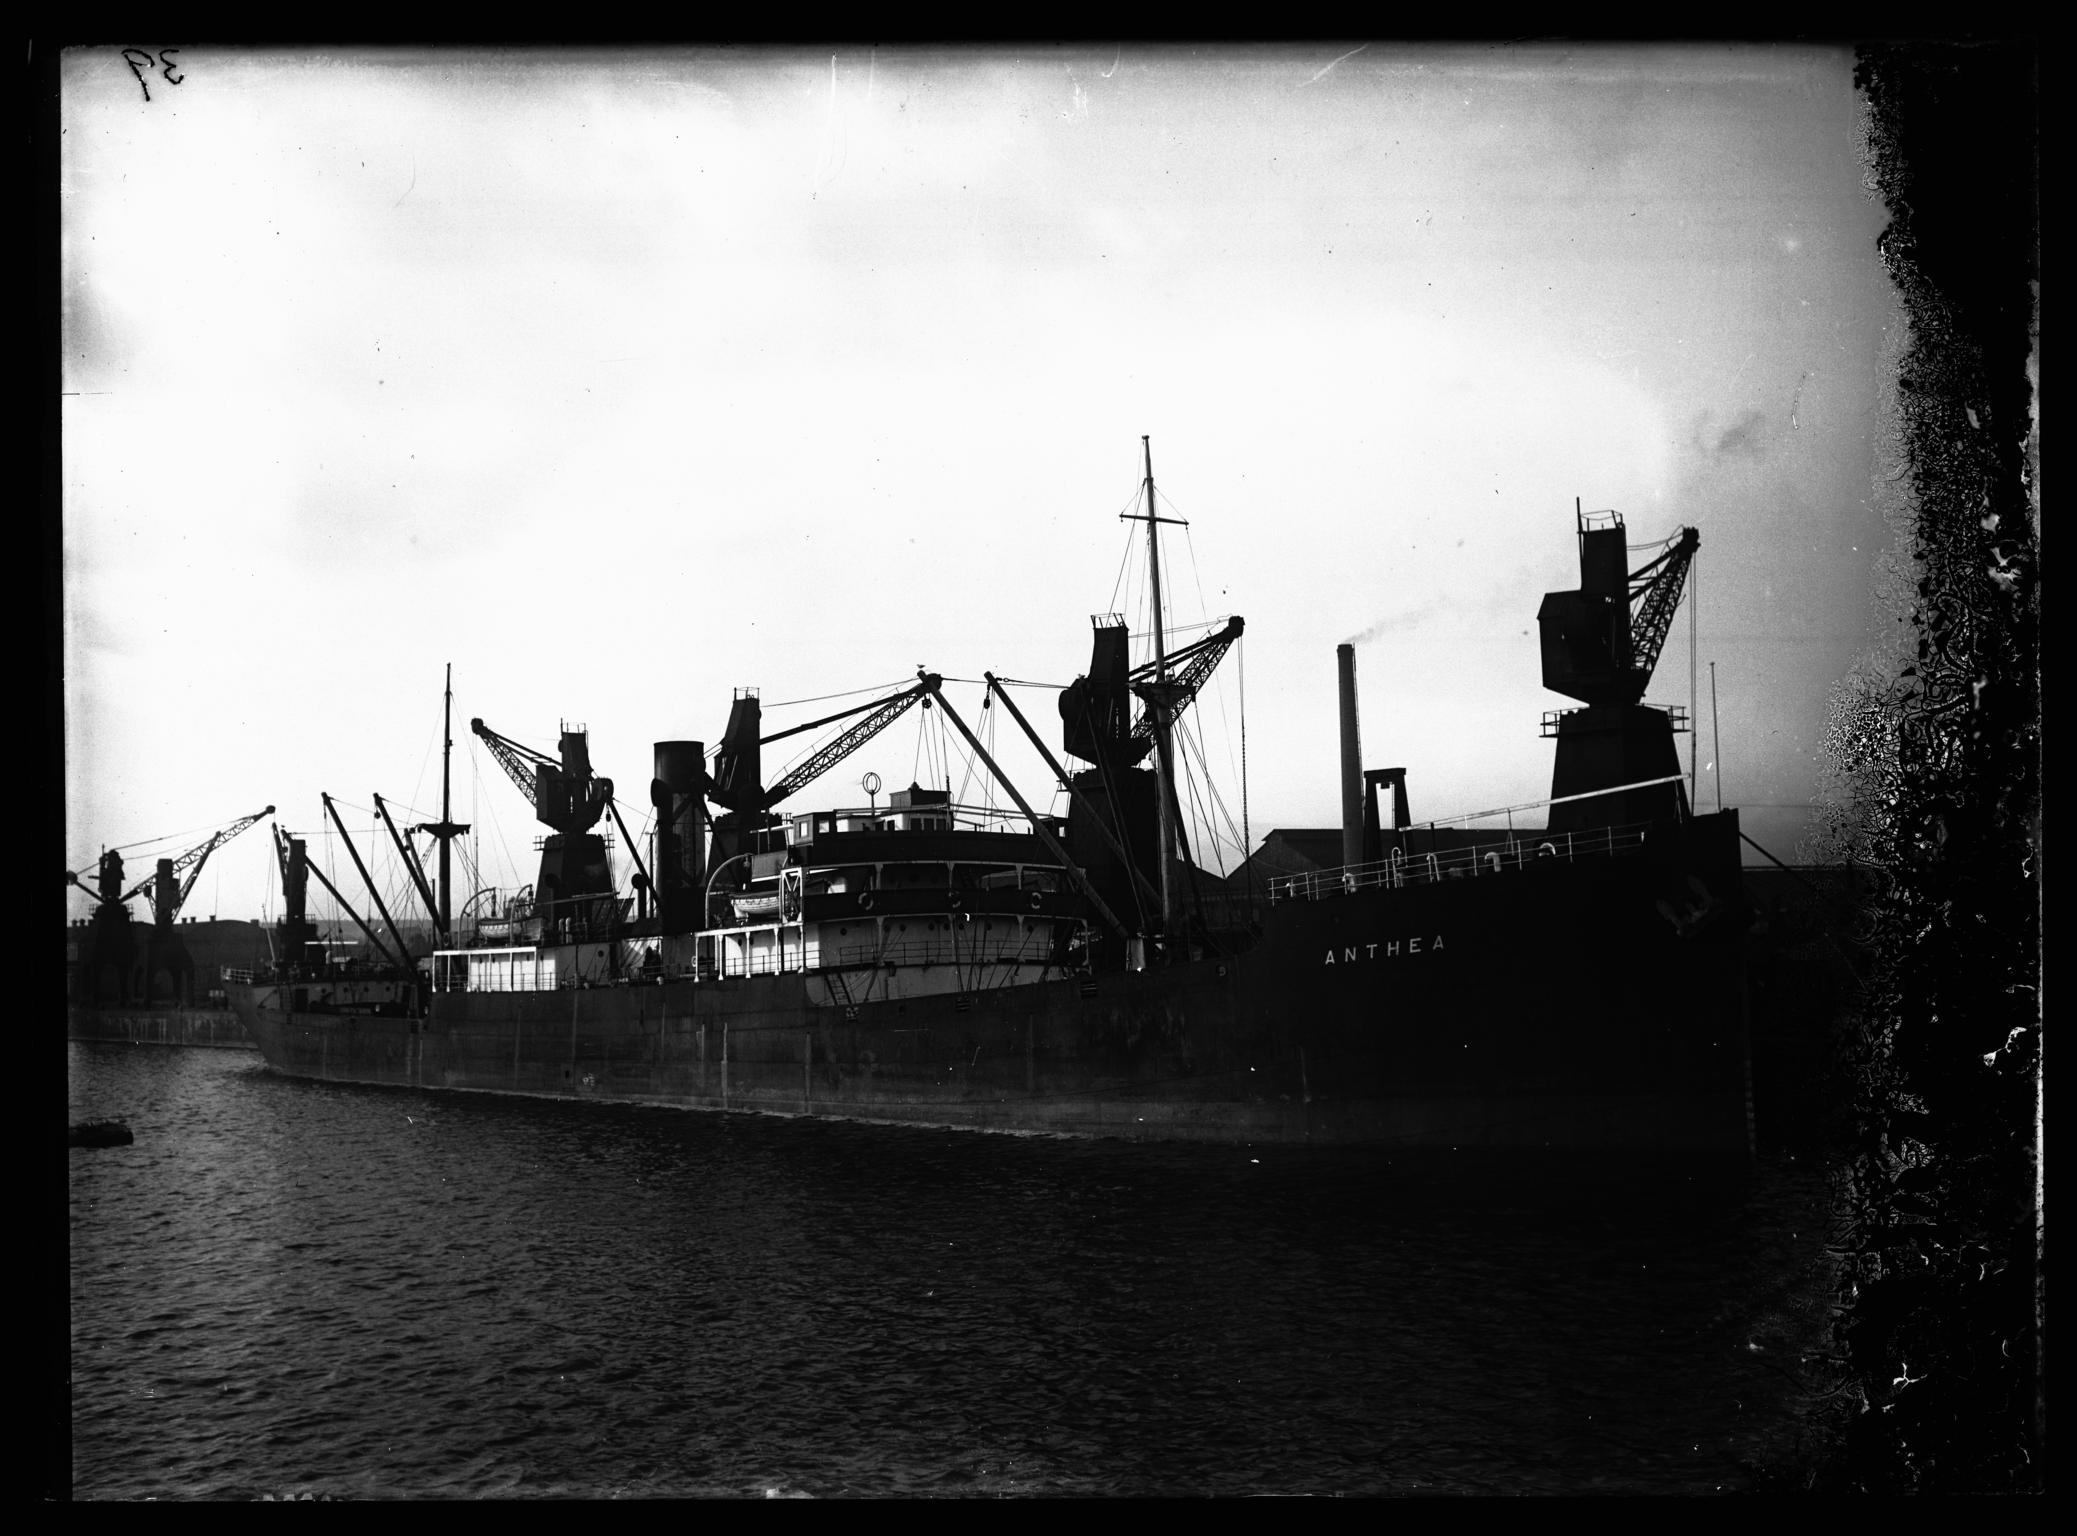 S.S. ANTHEA, glass negative